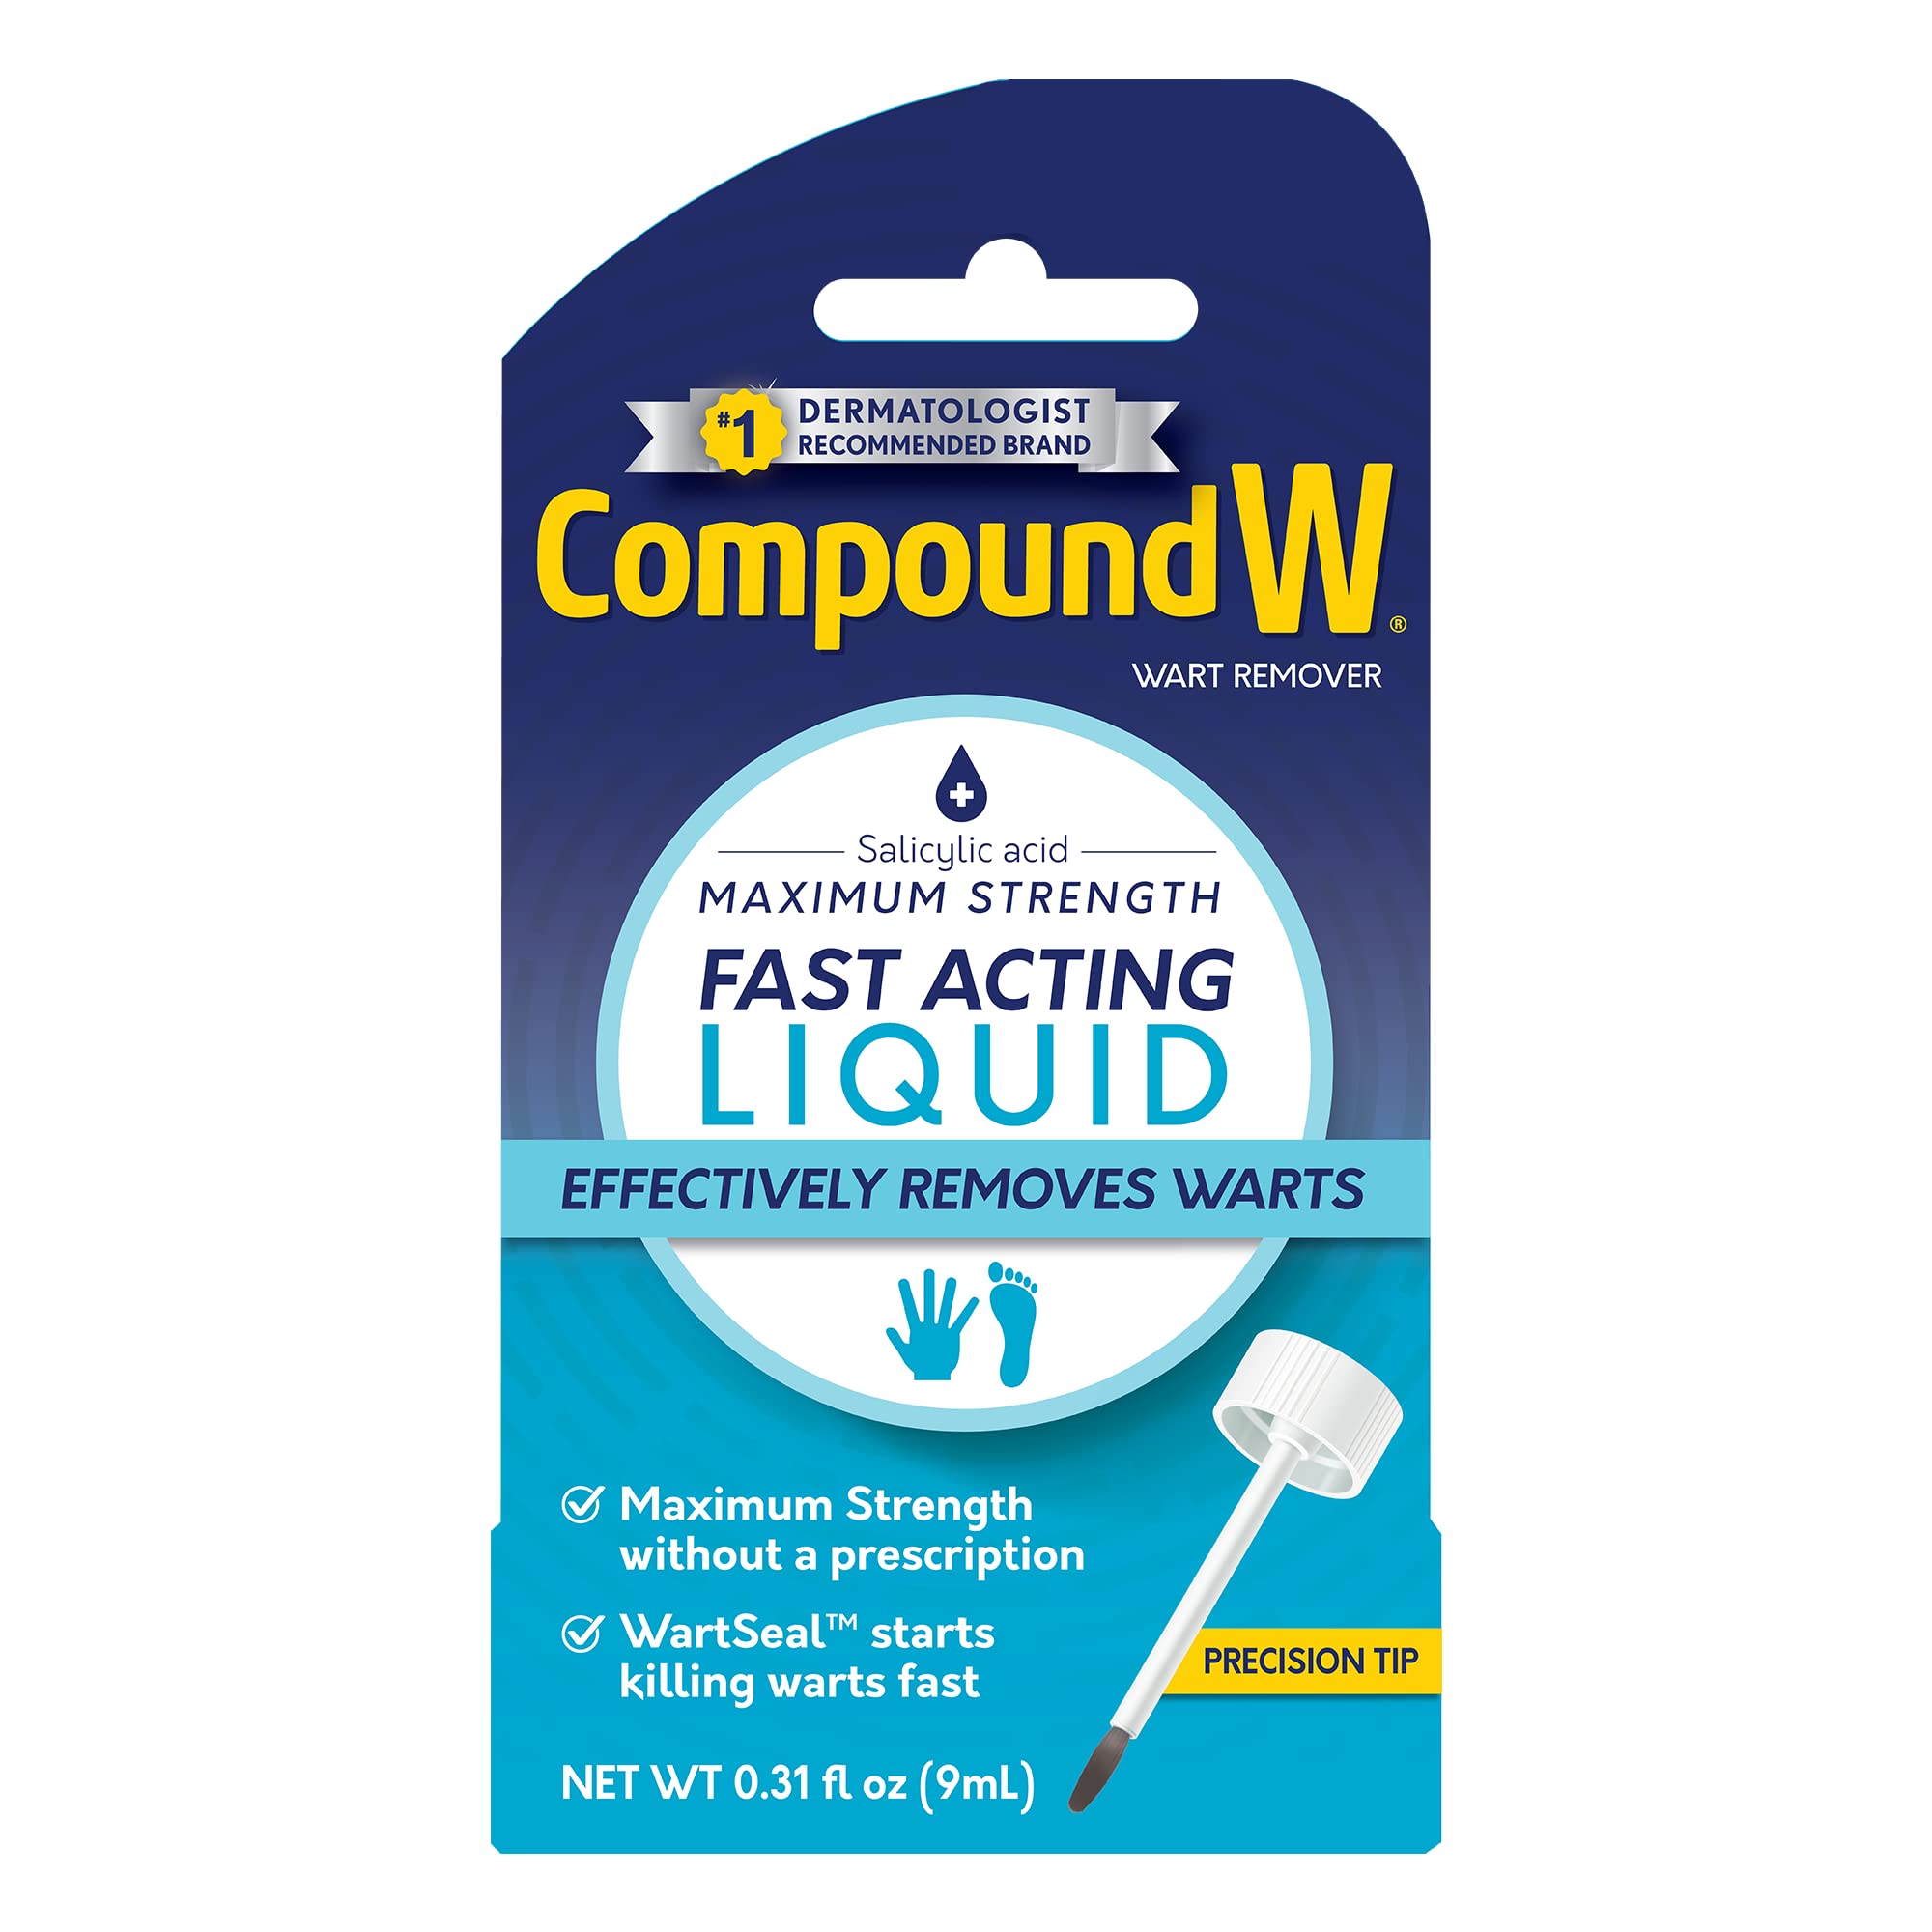 0.31-Oz Compound W Maximum Strength Fast Acting Liquid Wart Remover $1.95 + Free Shipping w/ Prime or on $35+